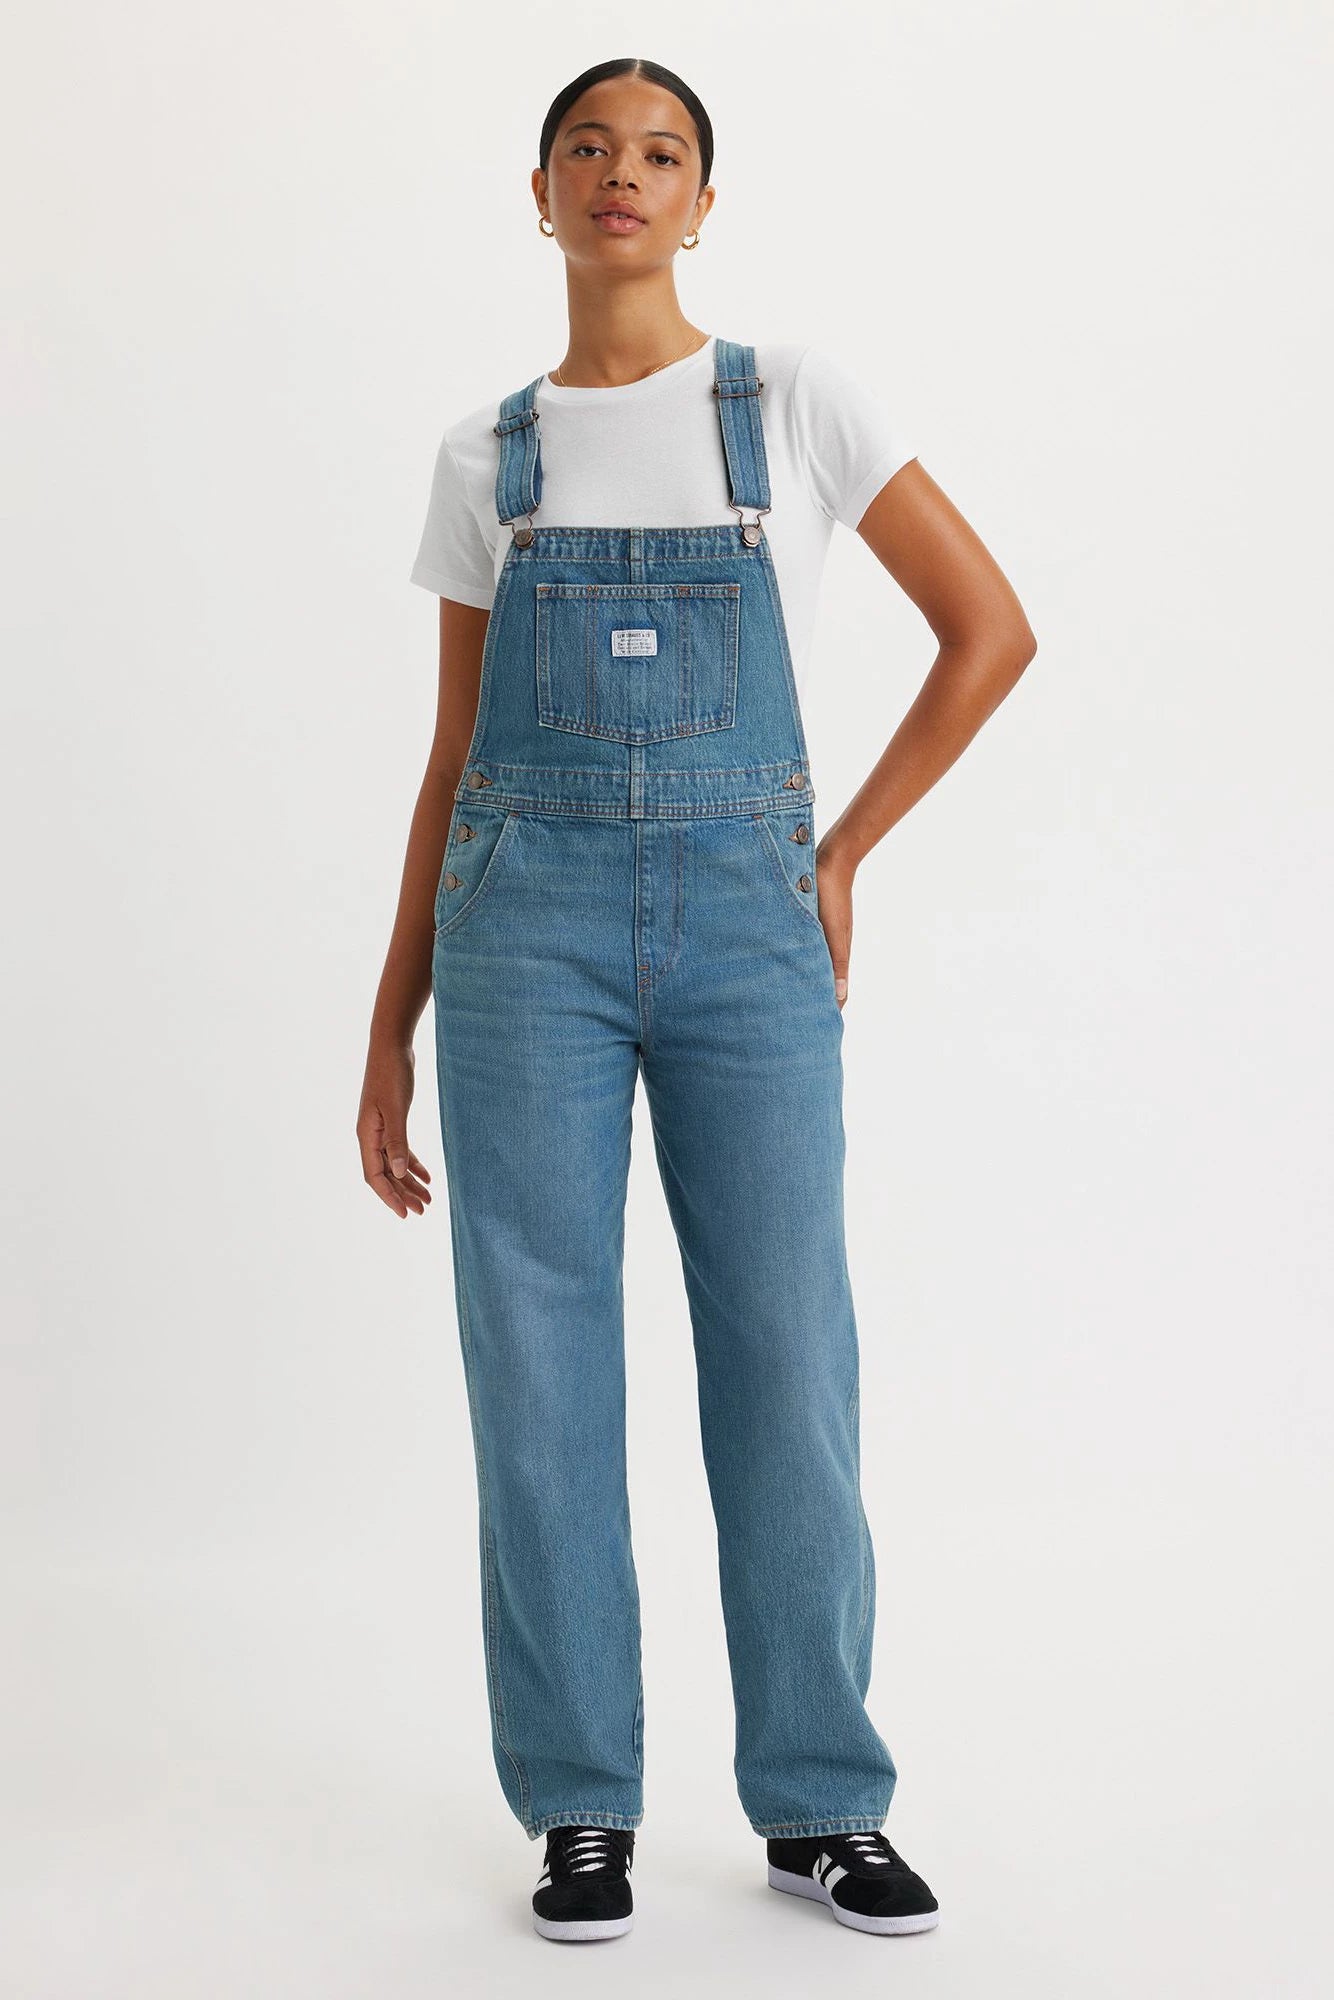 Vintage Overall Pants Levi's   